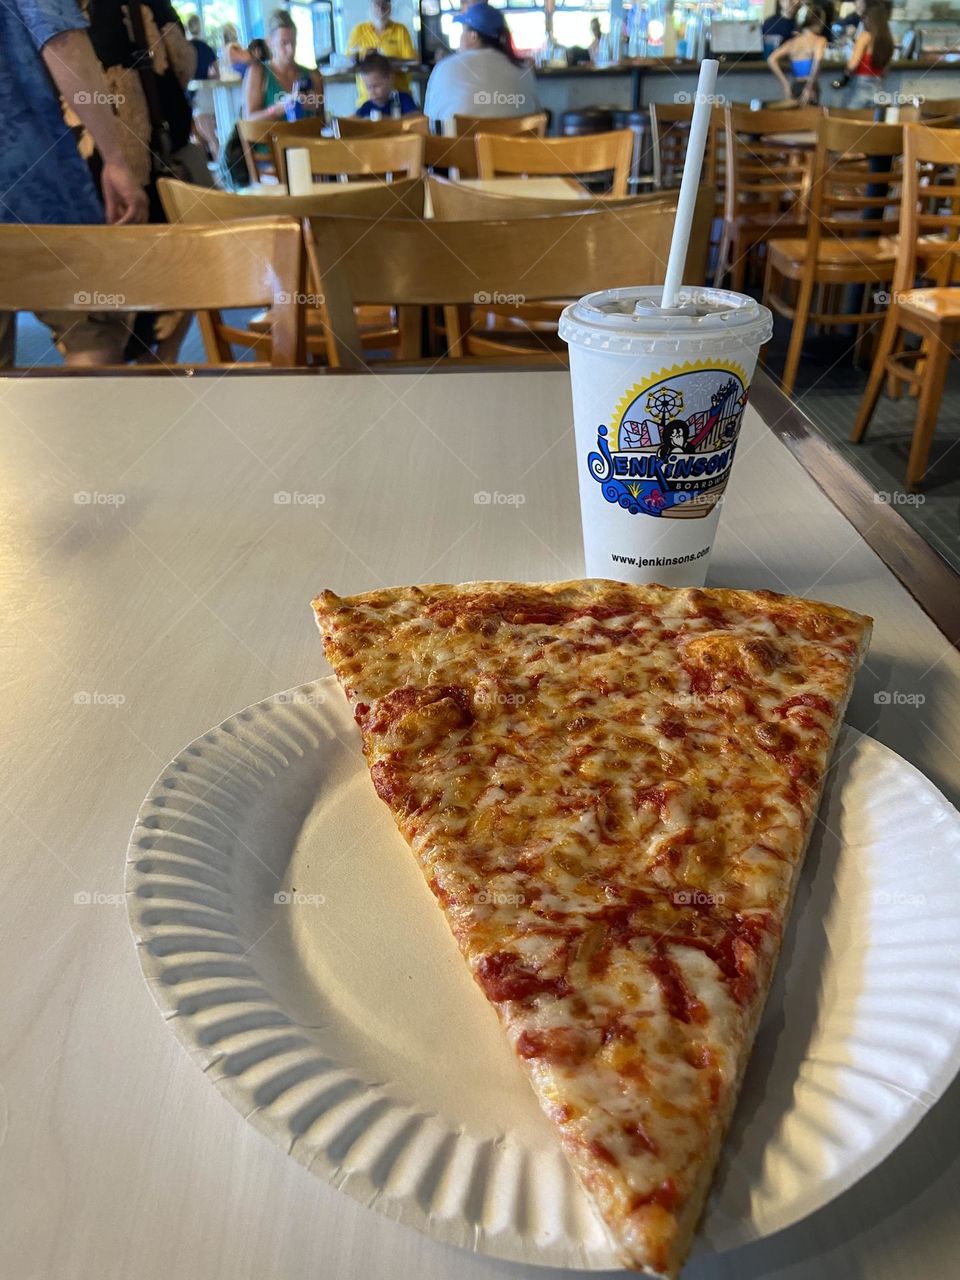 A pizza slice and soda from a restaurant counter at the boardwalk. What could be more authentic for Jersey Shore summer meal. Everything tastes better on the boardwalk. People in the background are enjoying seafood, sushi, and drinks at the bar. 